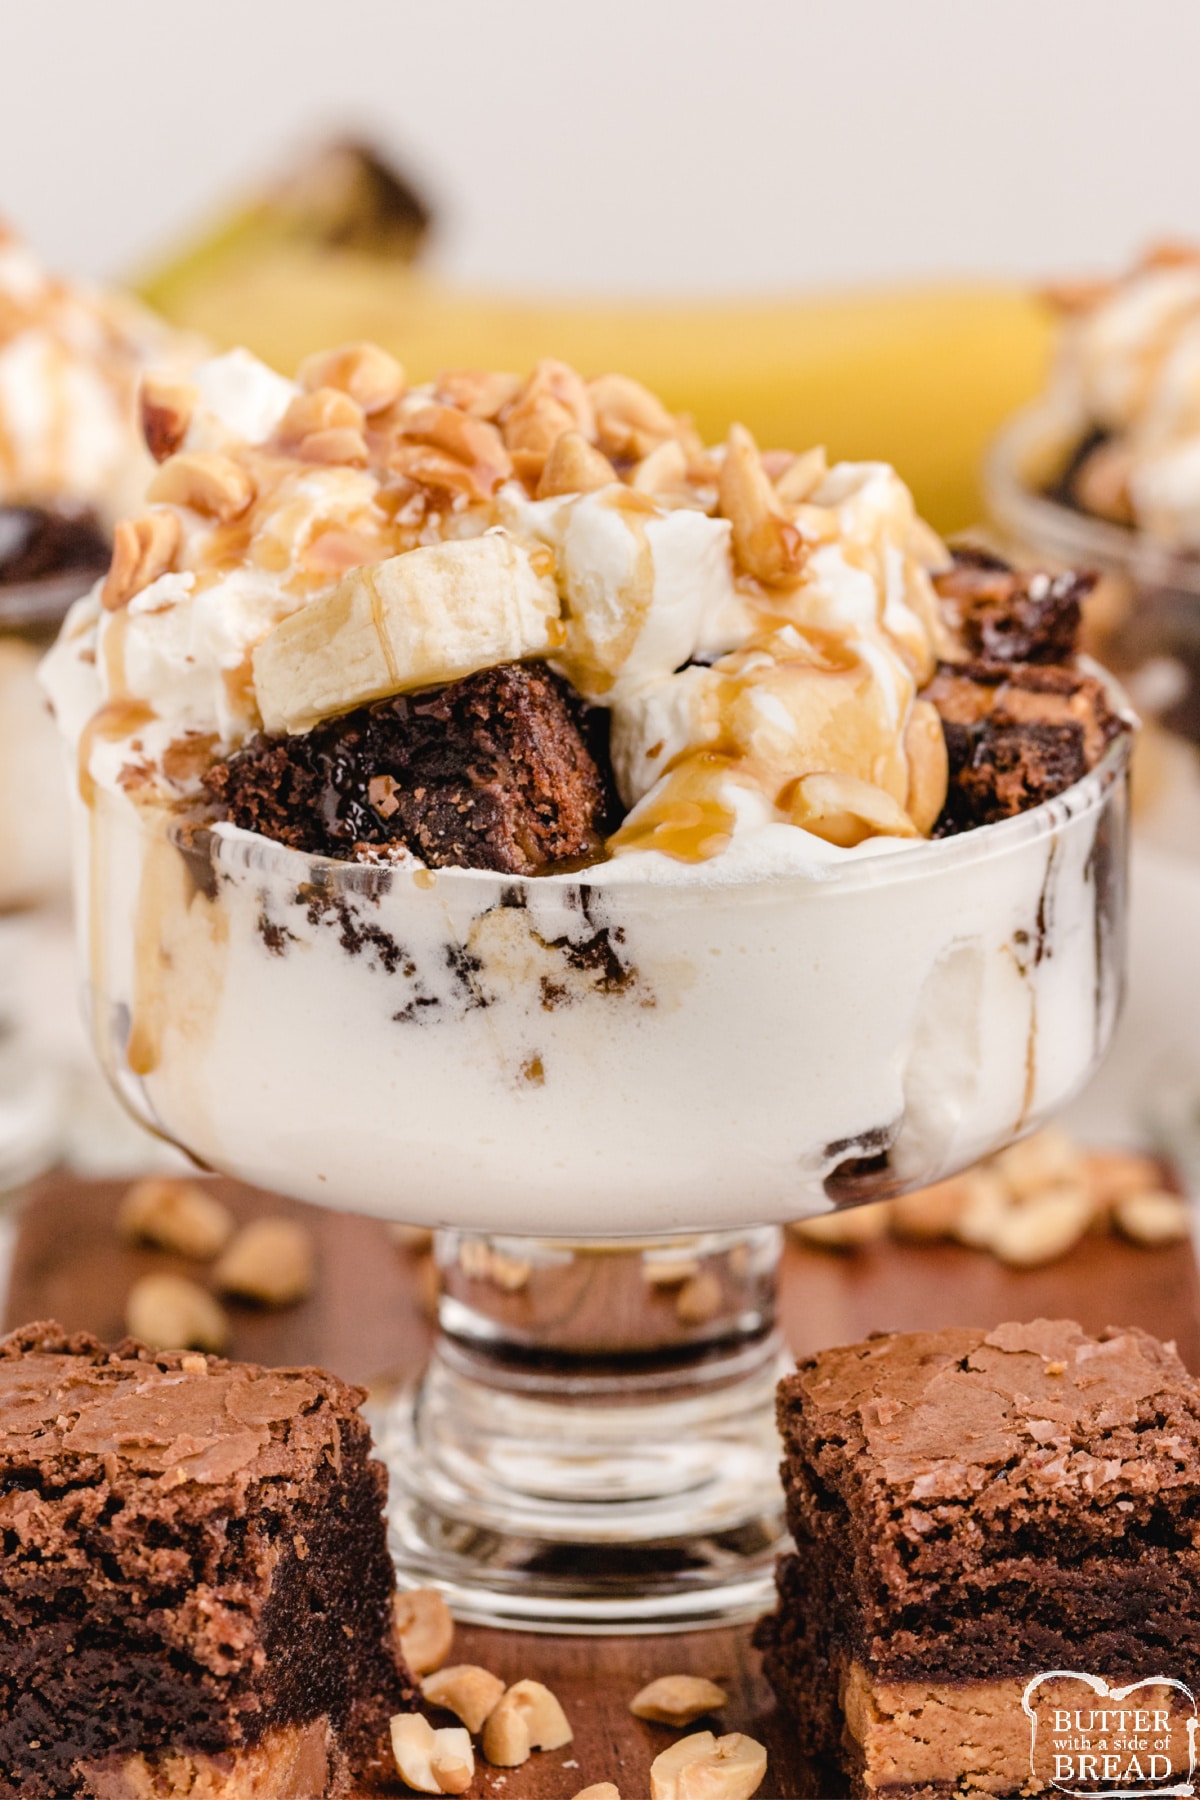 Brownie trifle made with Reese's peanut butter cups, caramel, whipped cream, bananas and chopped peanuts